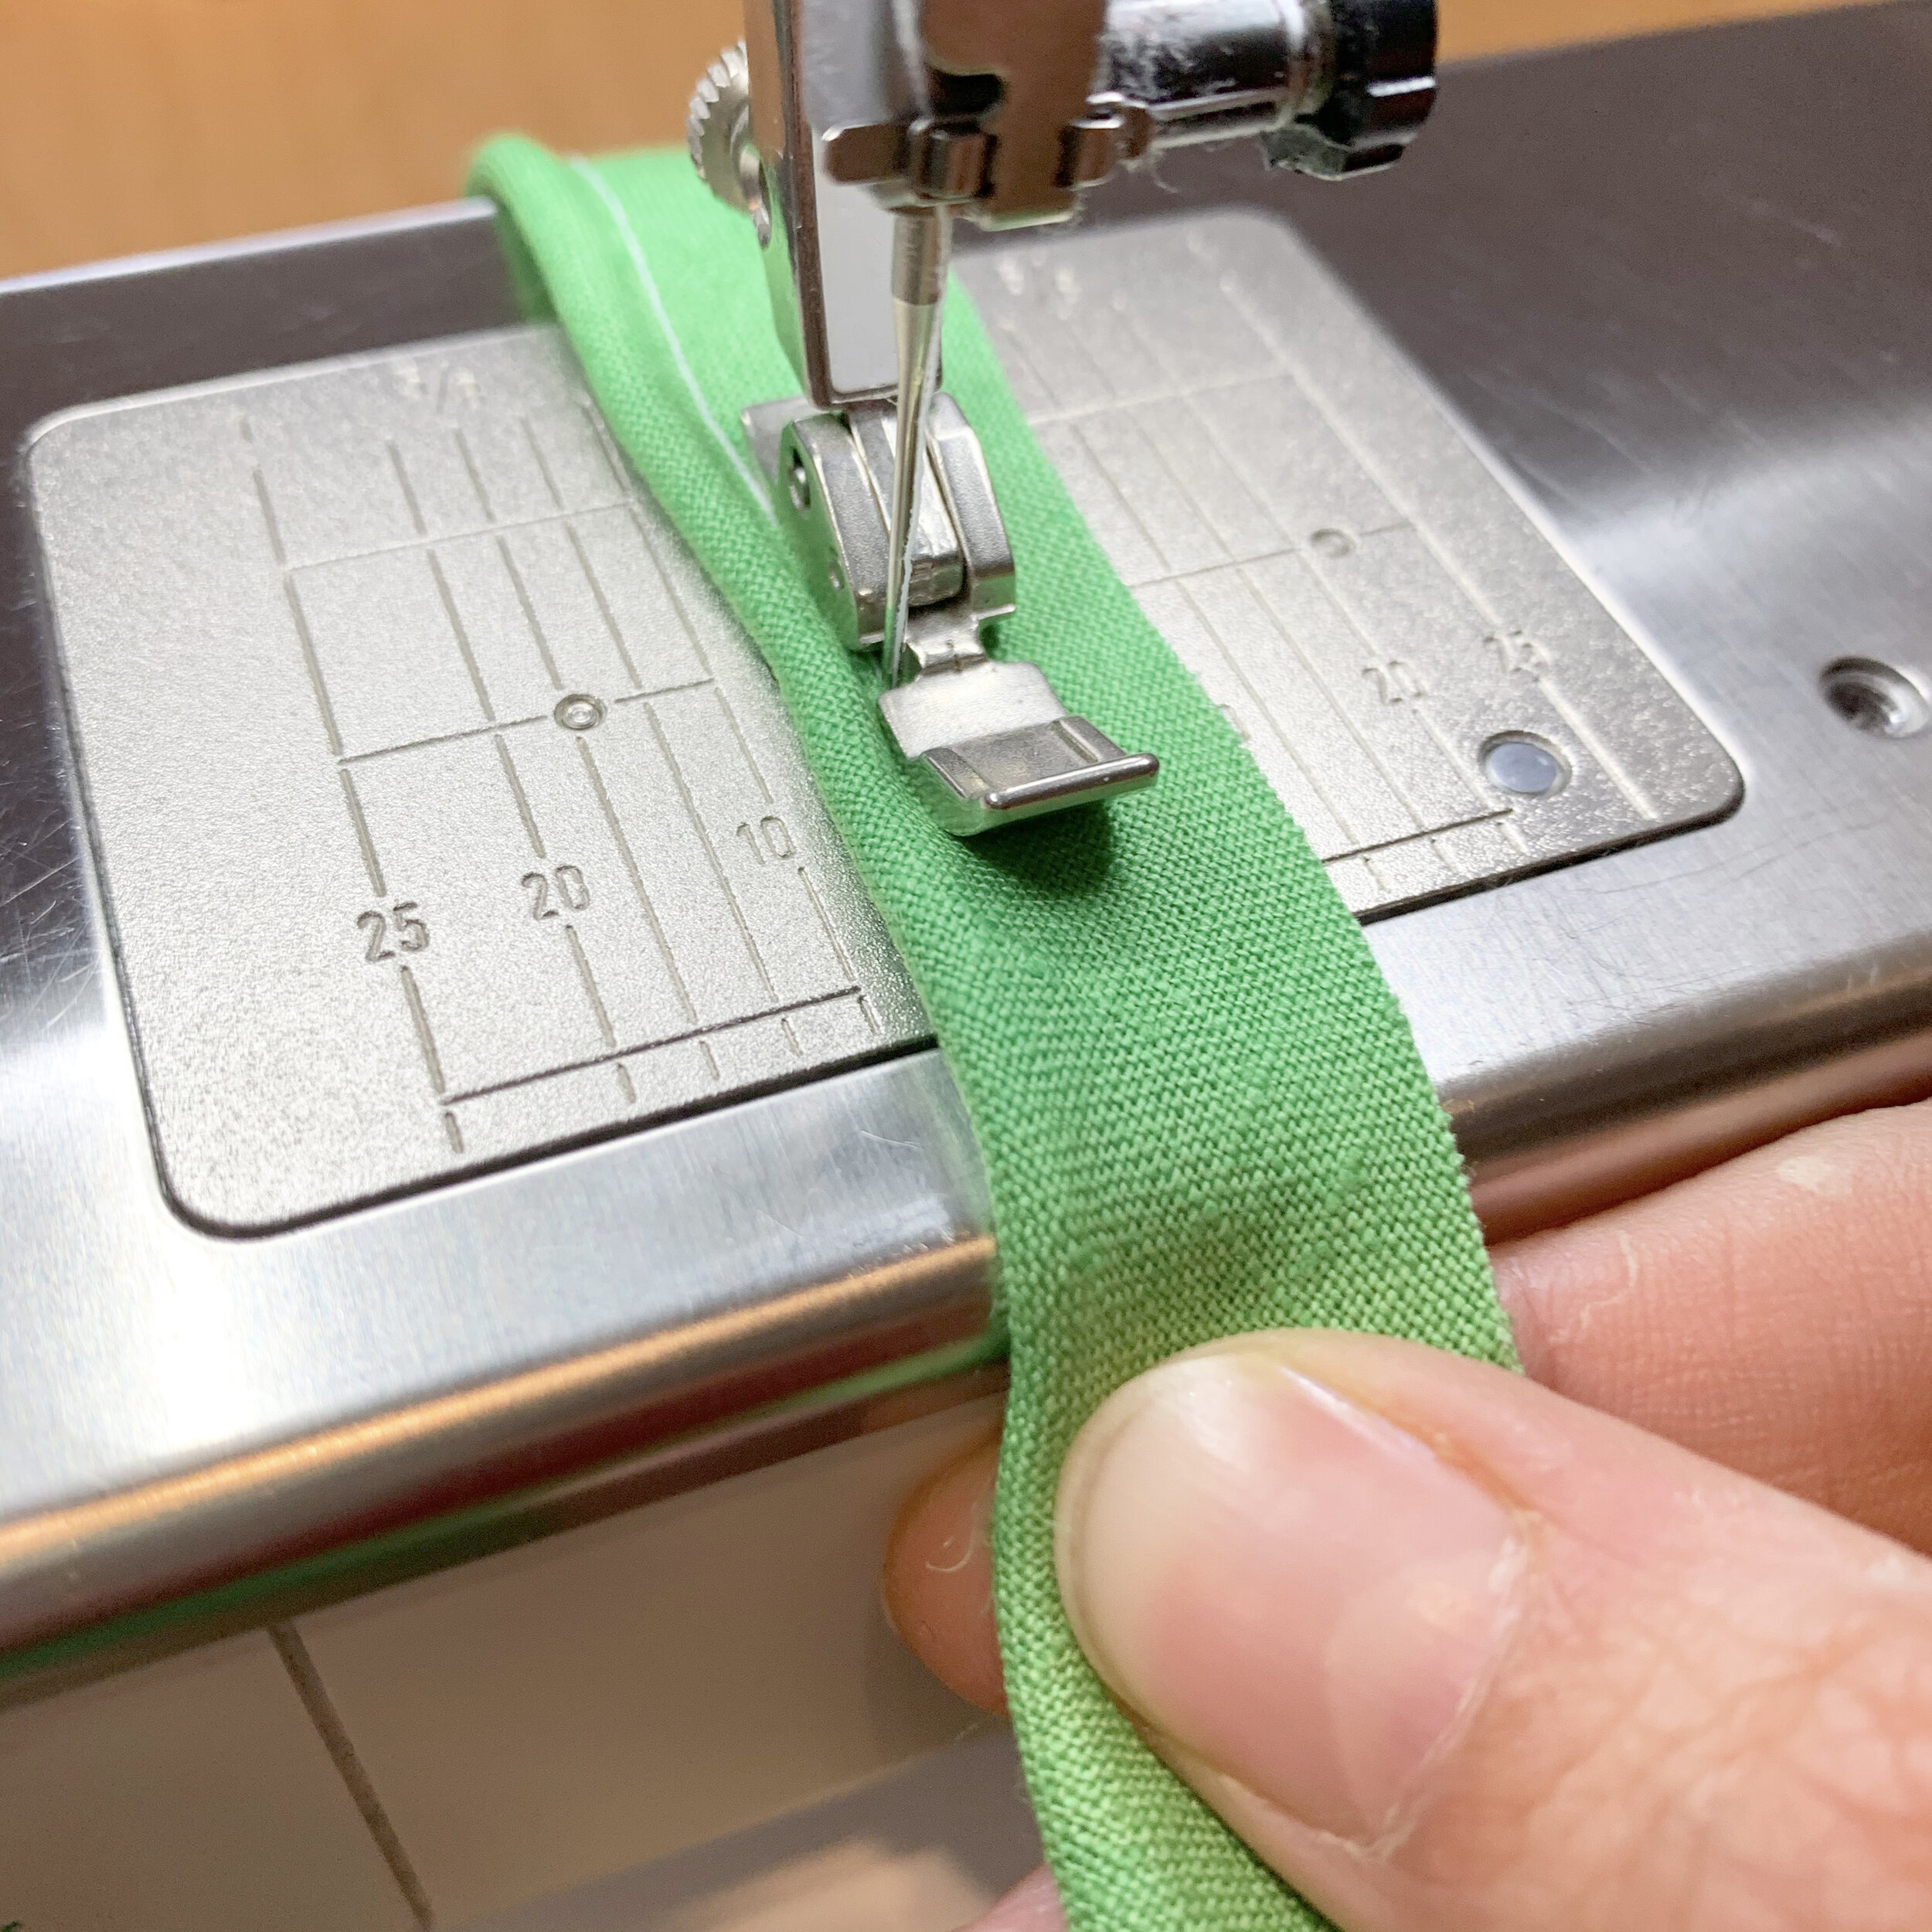 Sewing Piping: How to Make Your Own